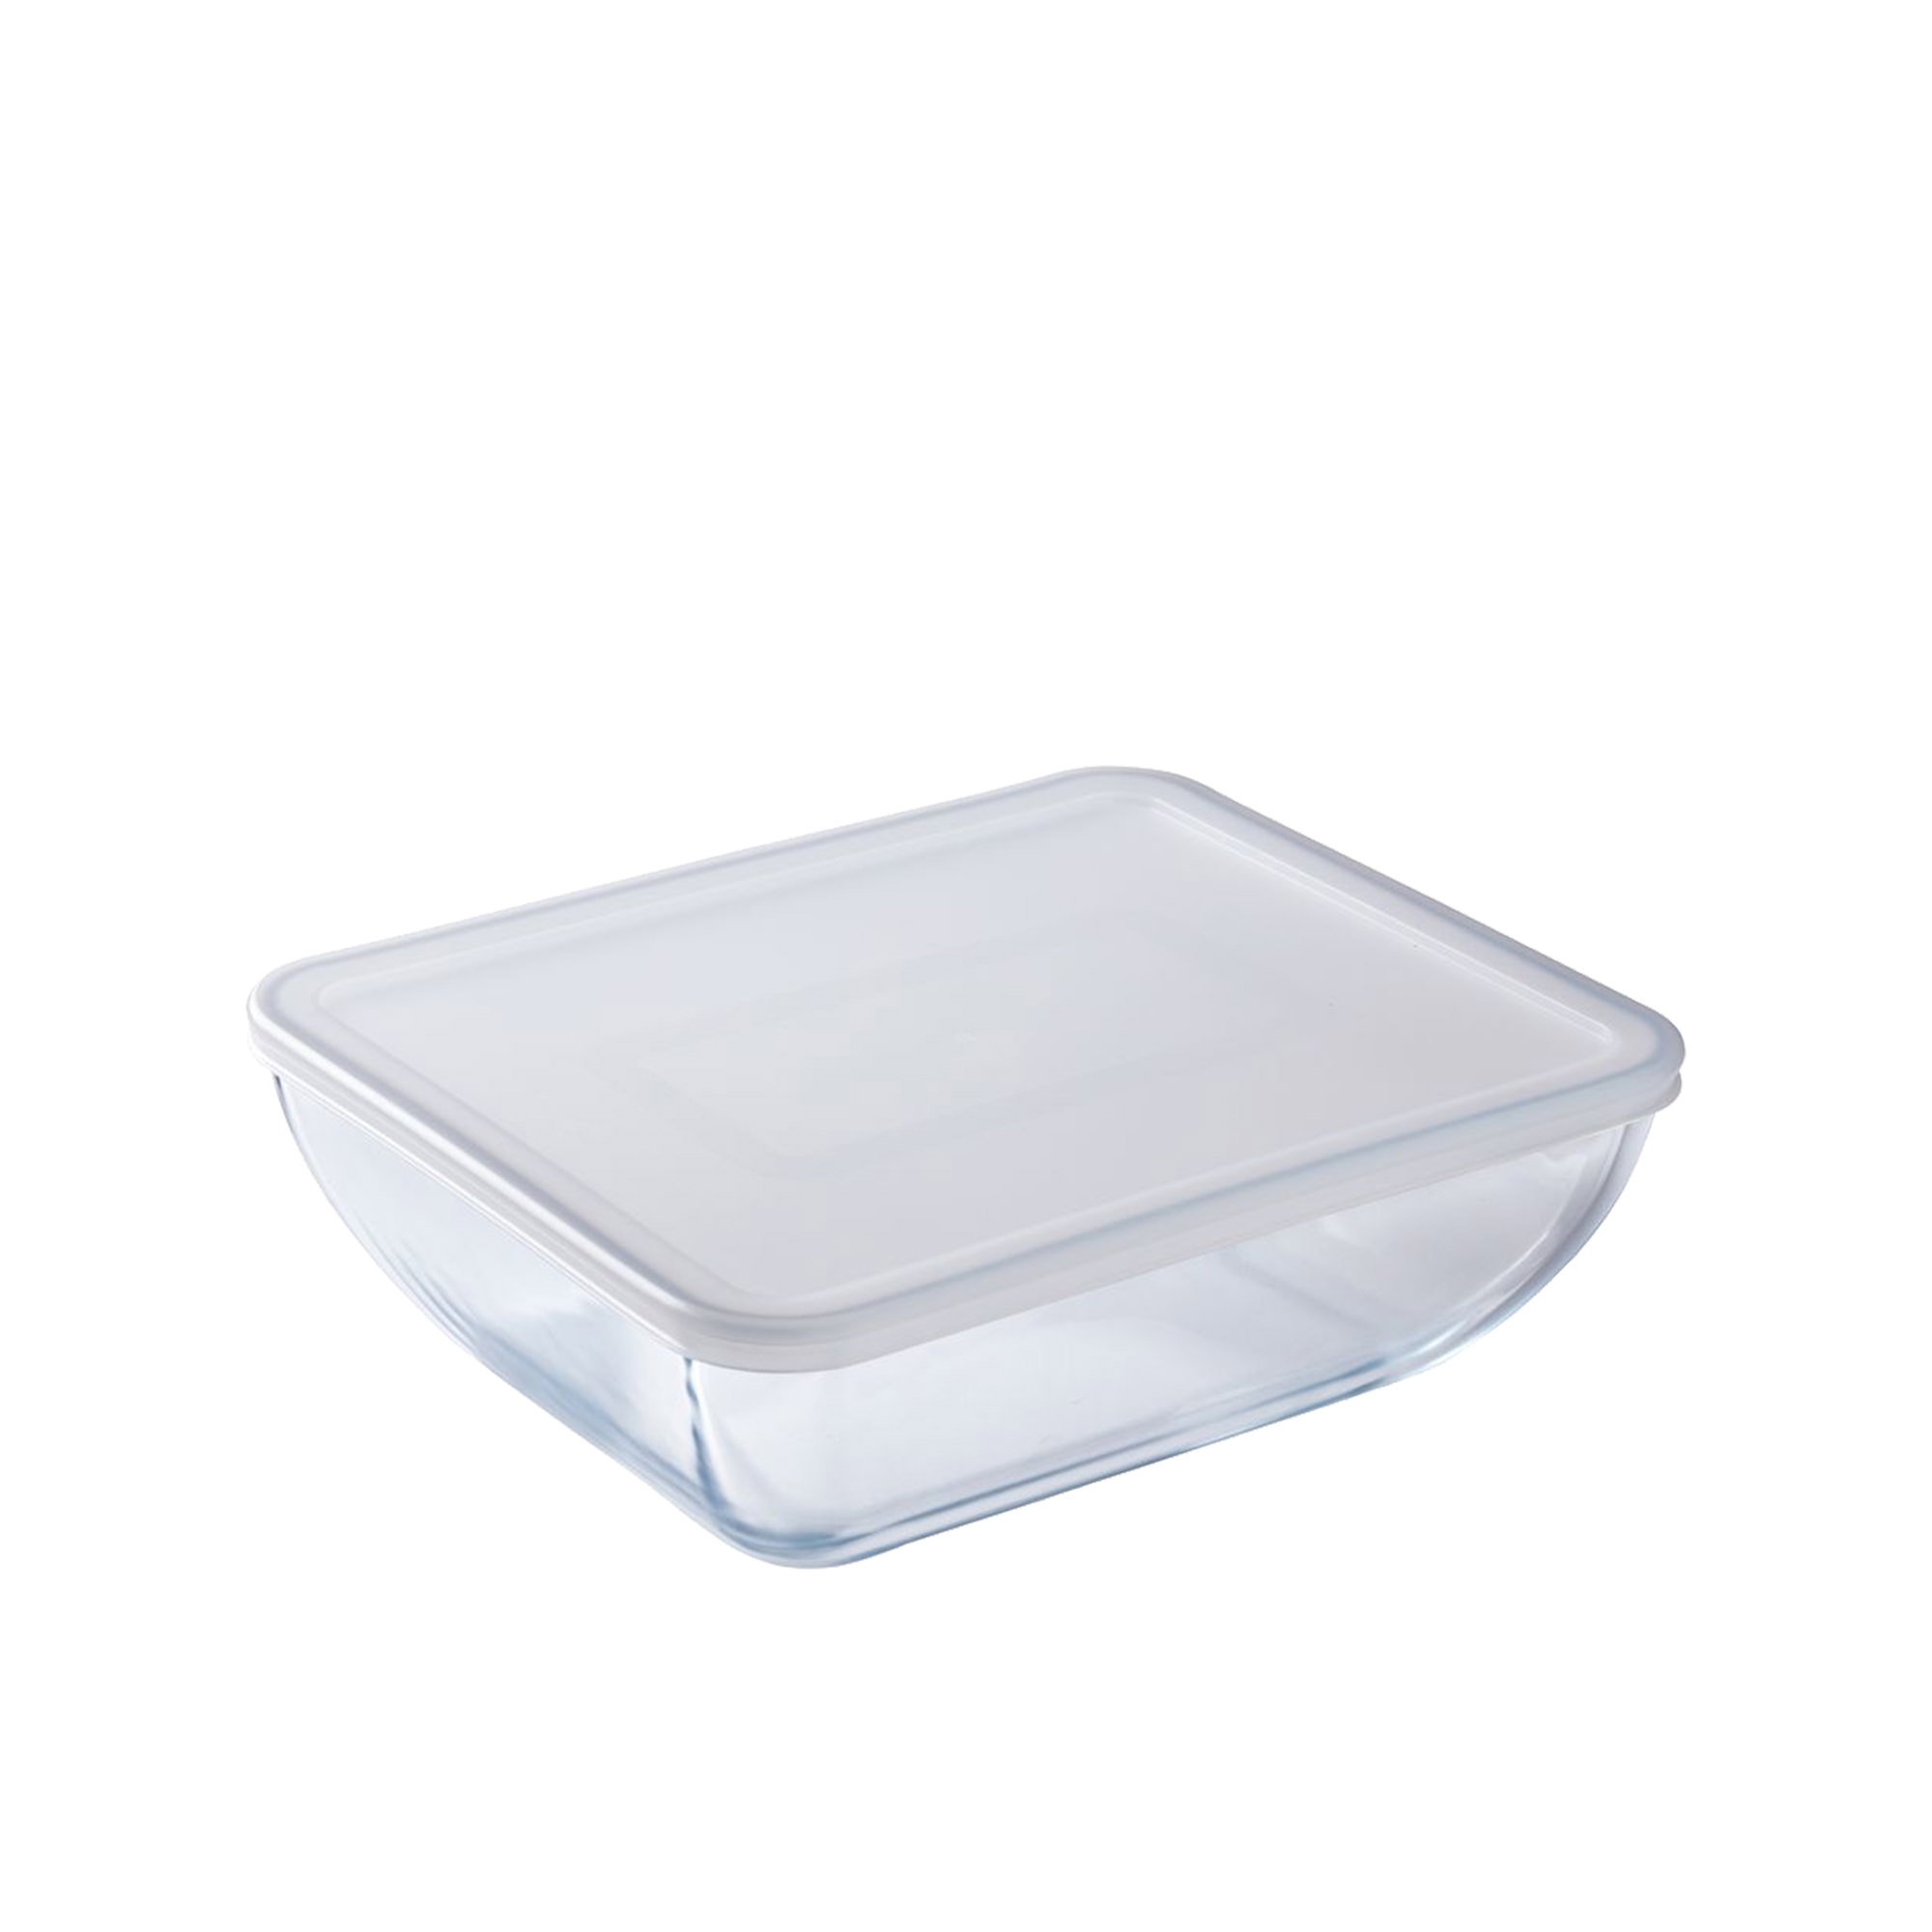 O' Cuisine Rectangular Glass Food Storage Container 1.3L Image 1